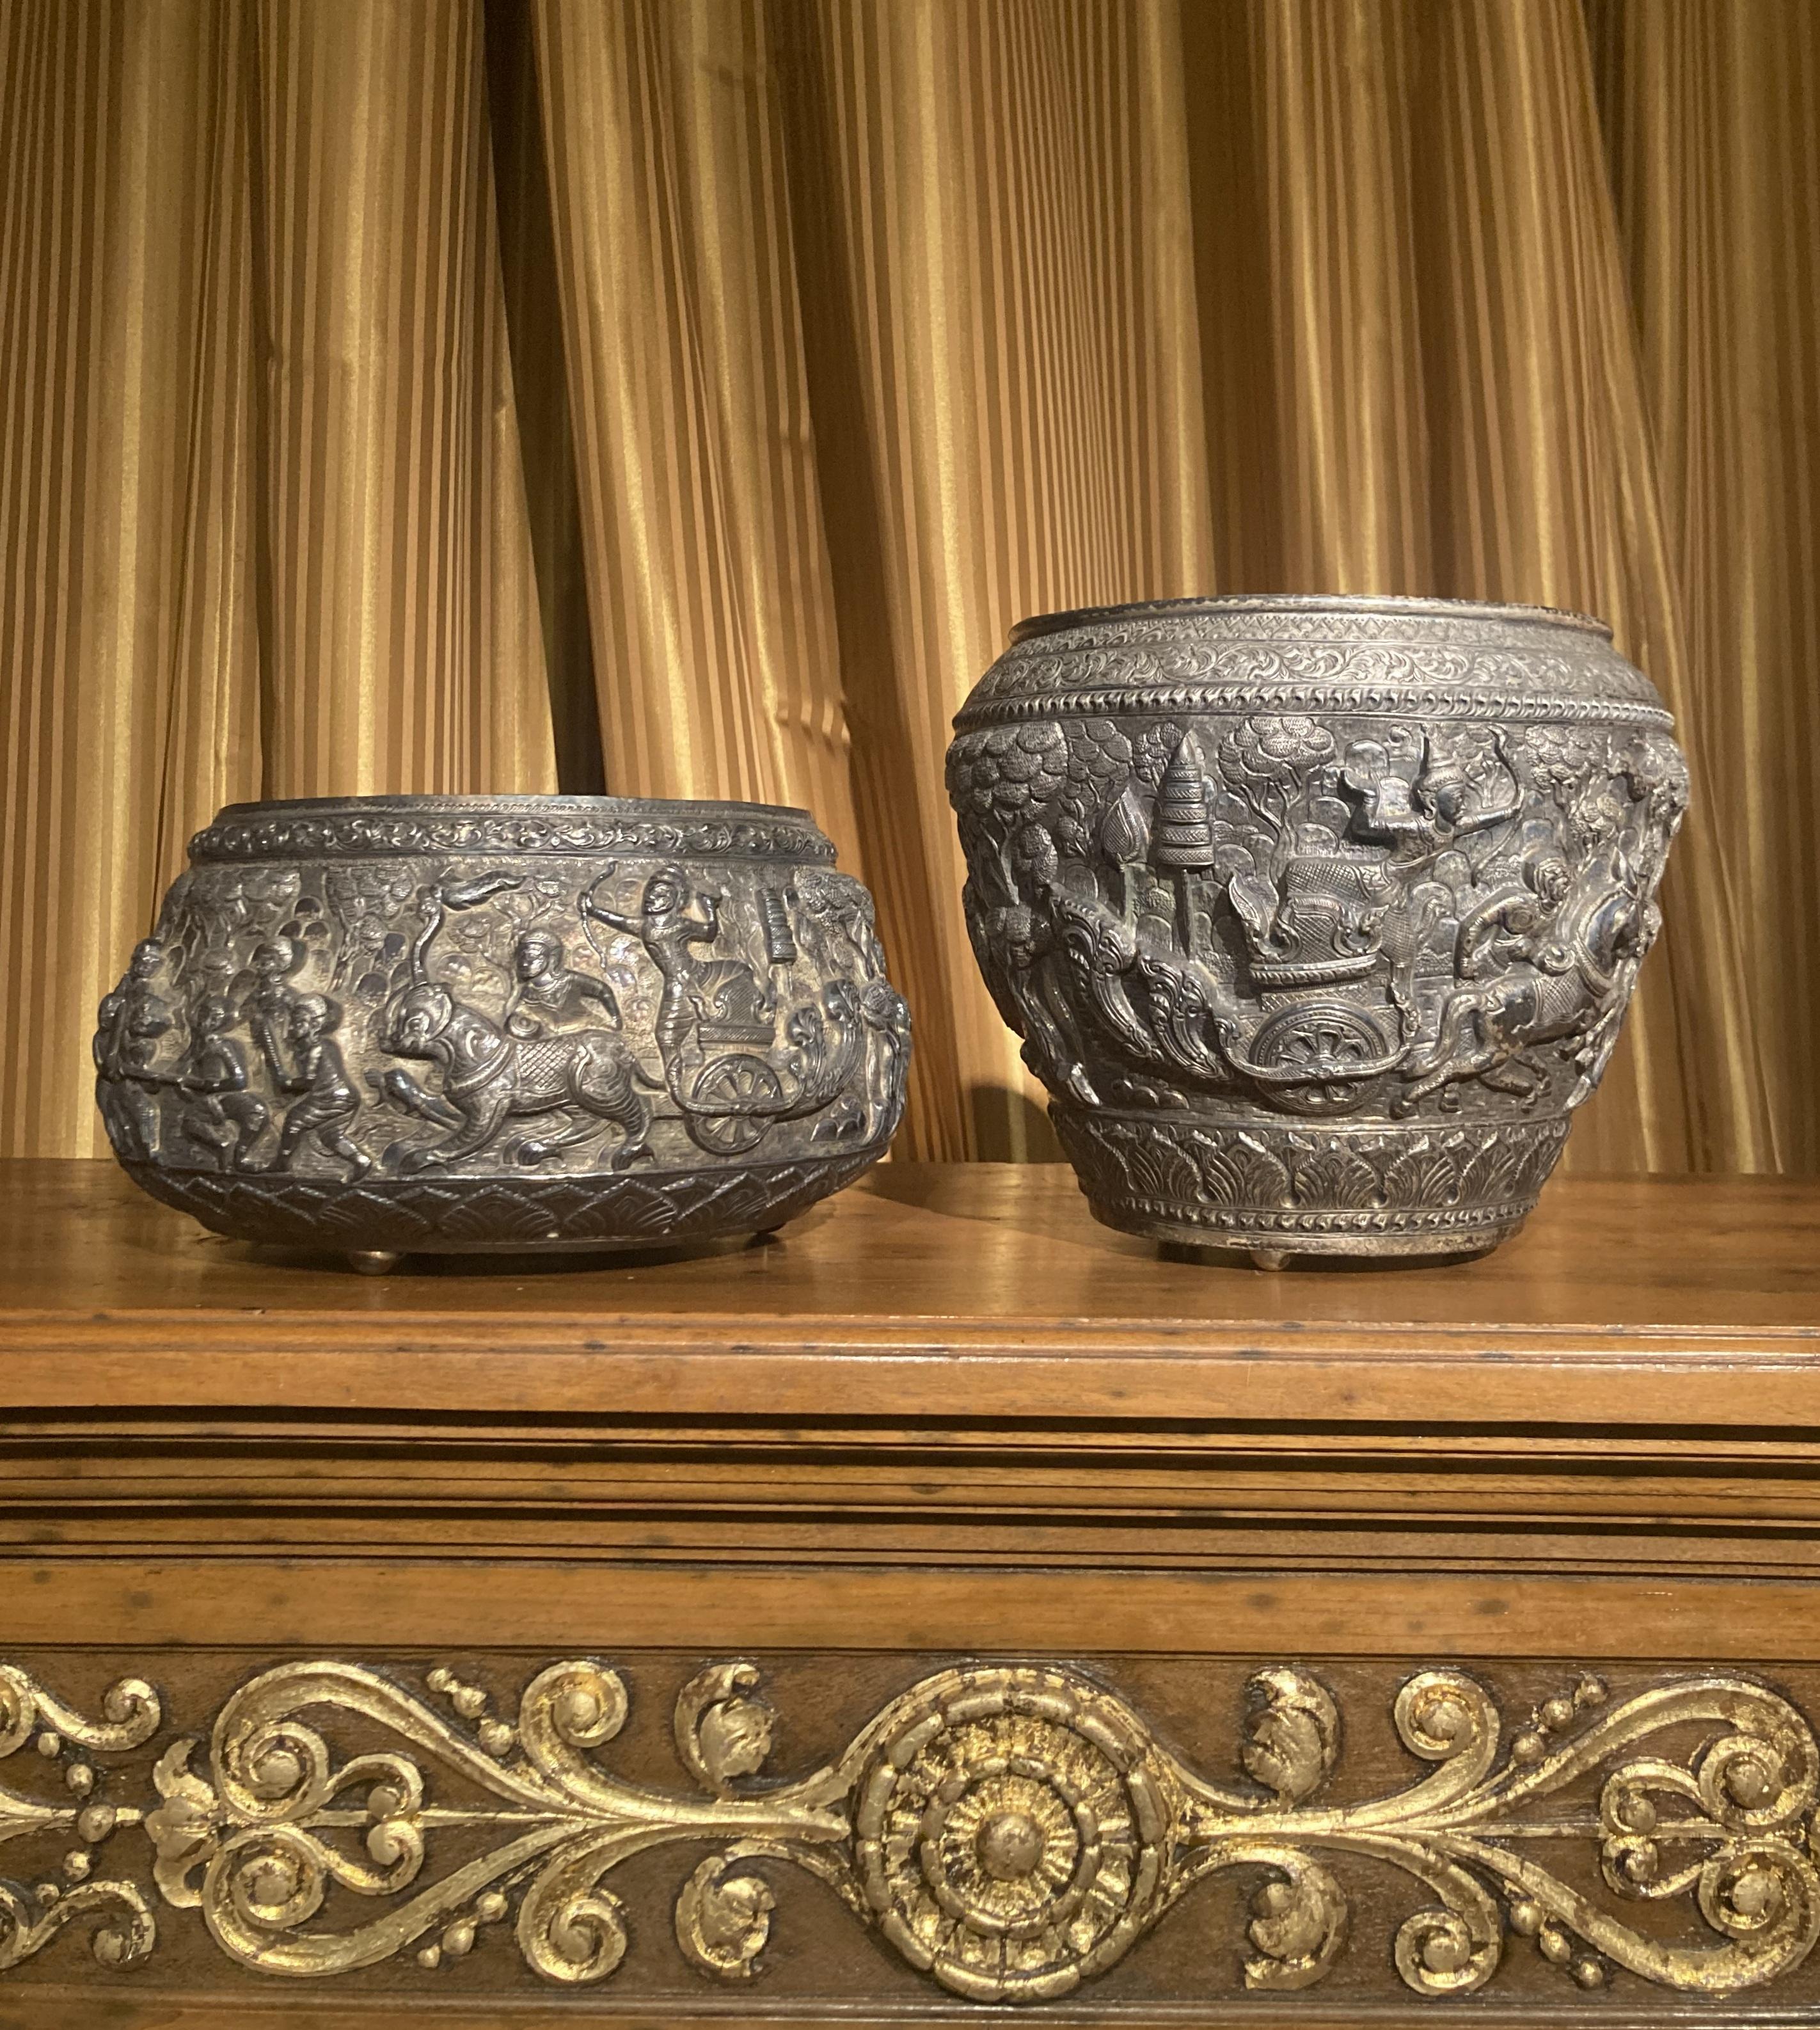 This is a sensational pair of 19th century antique Burmese silver repousse Thabeik bowls, both richly decorated in the round in high relief depicting different traditional scenes from the Burmese mythology and history, showing very detailed figures,